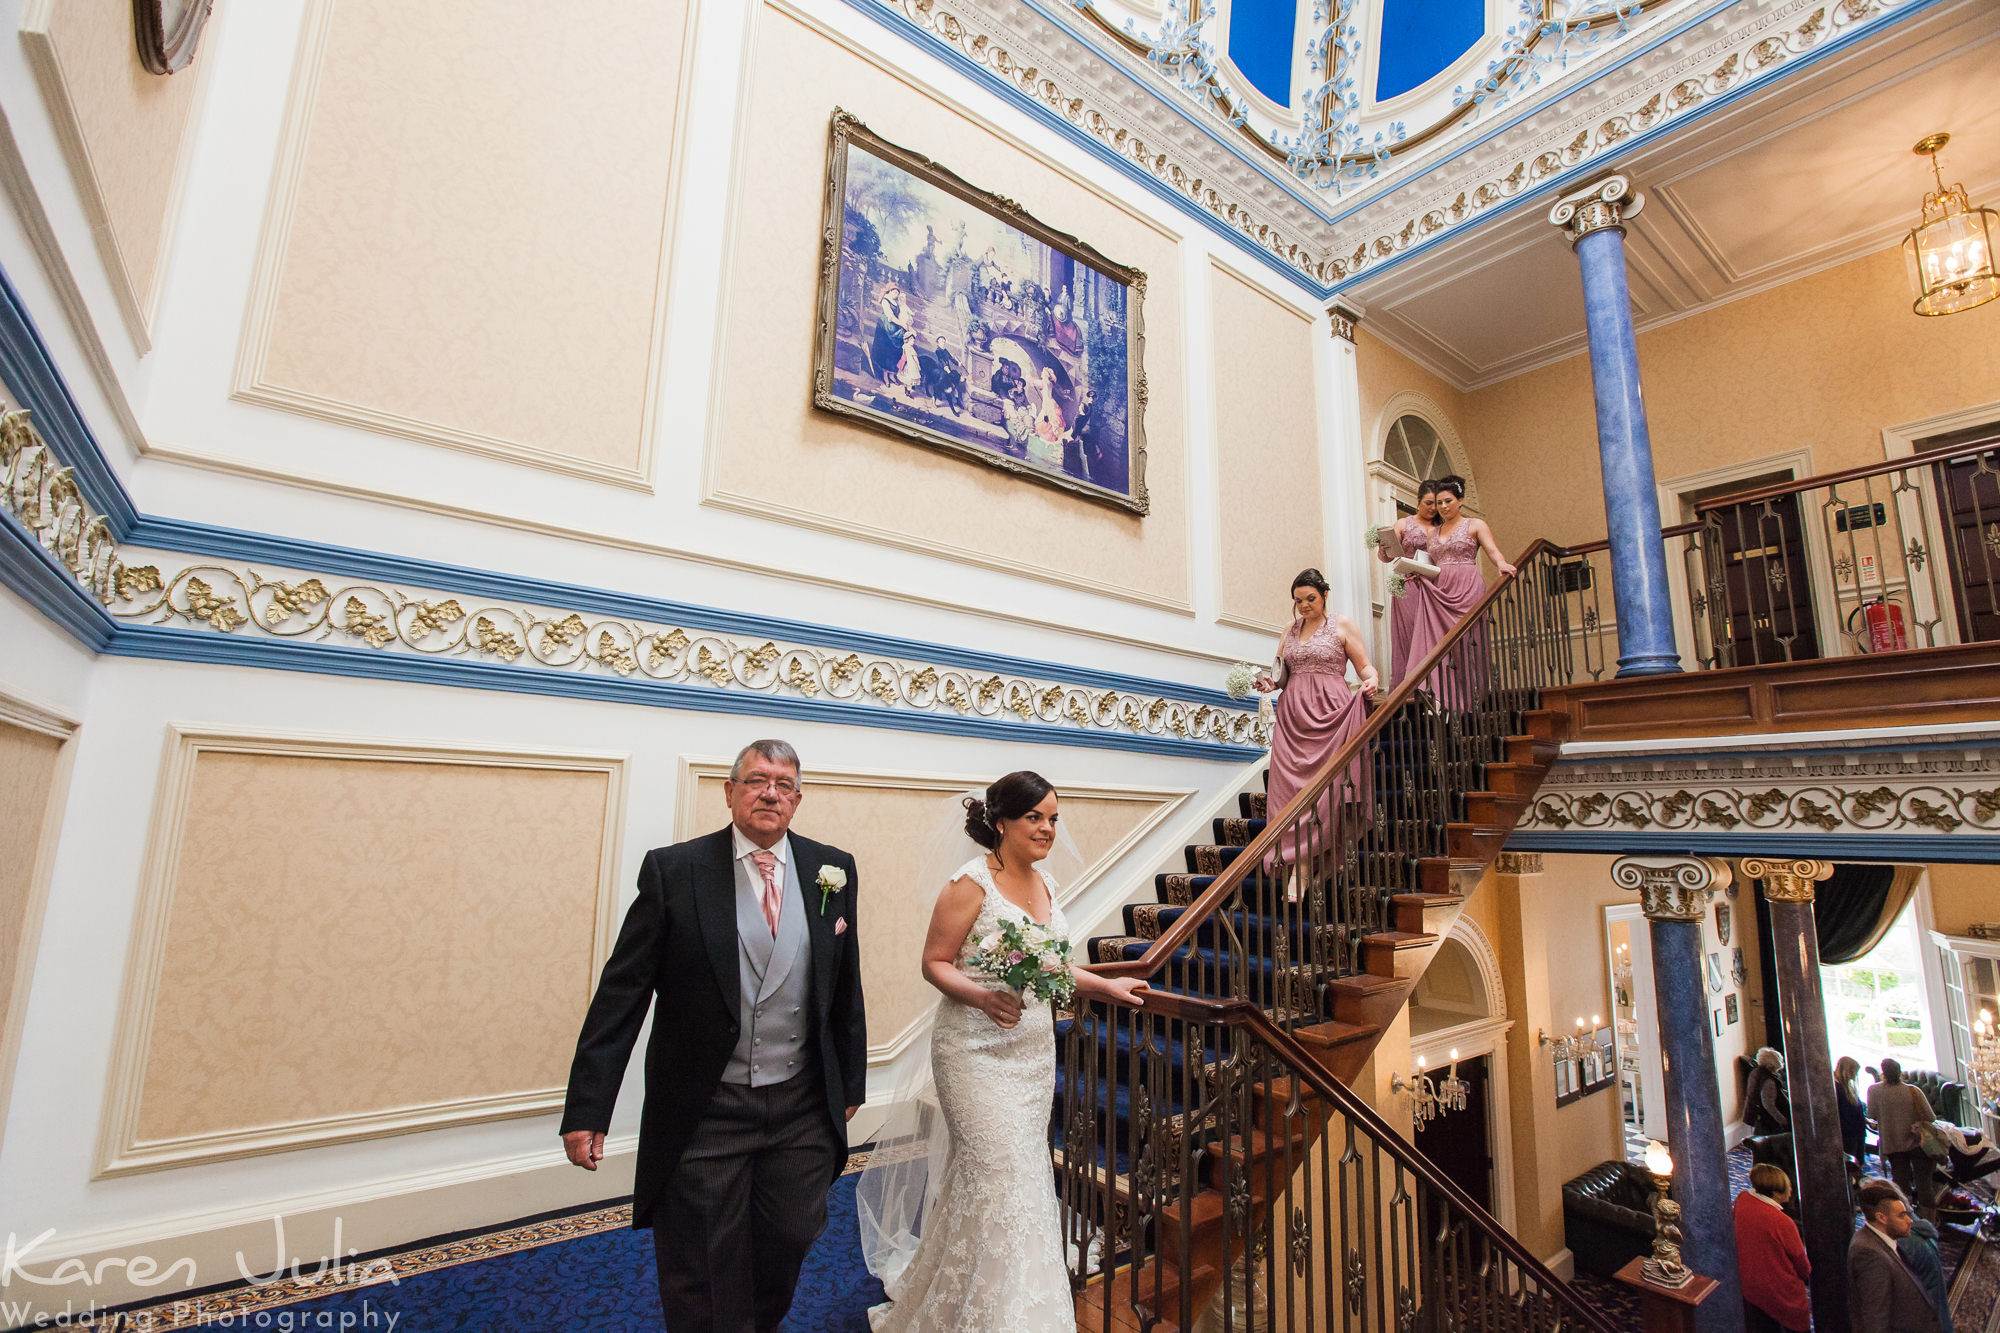 bride and her dad walk down stairs to ceremony, followed by bridesmaids